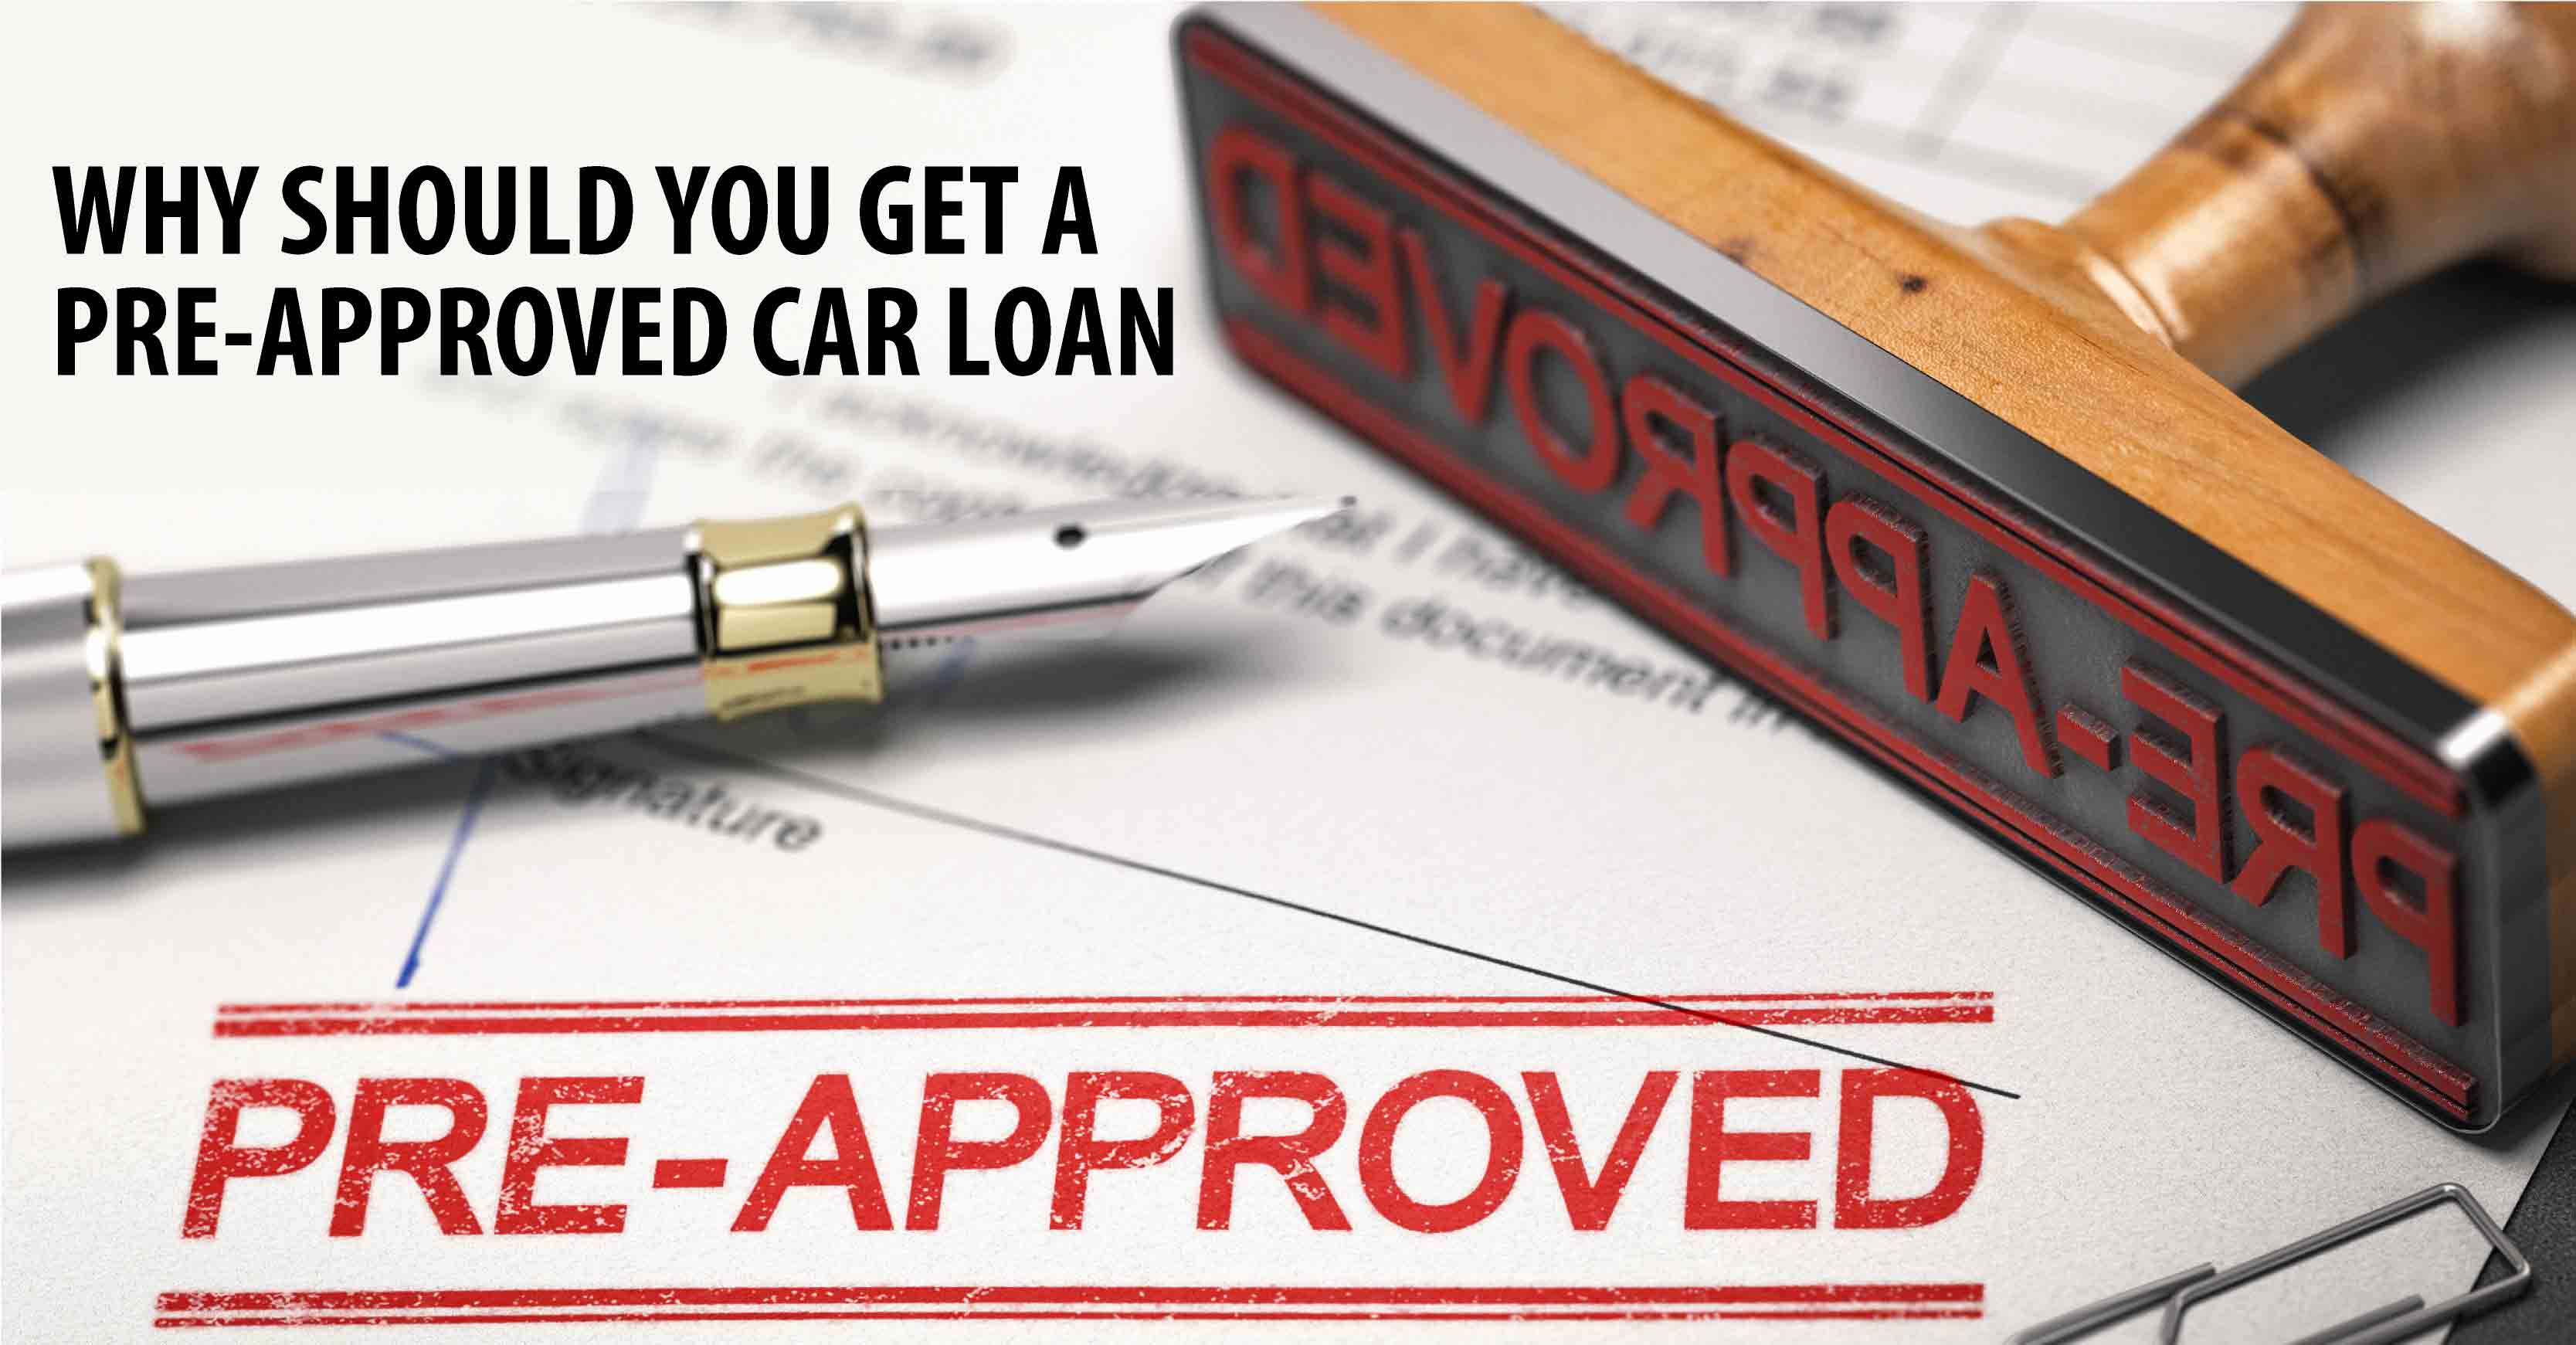 WHY SHOULD YOU GET A PRE-APPROVED CAR LOAN?